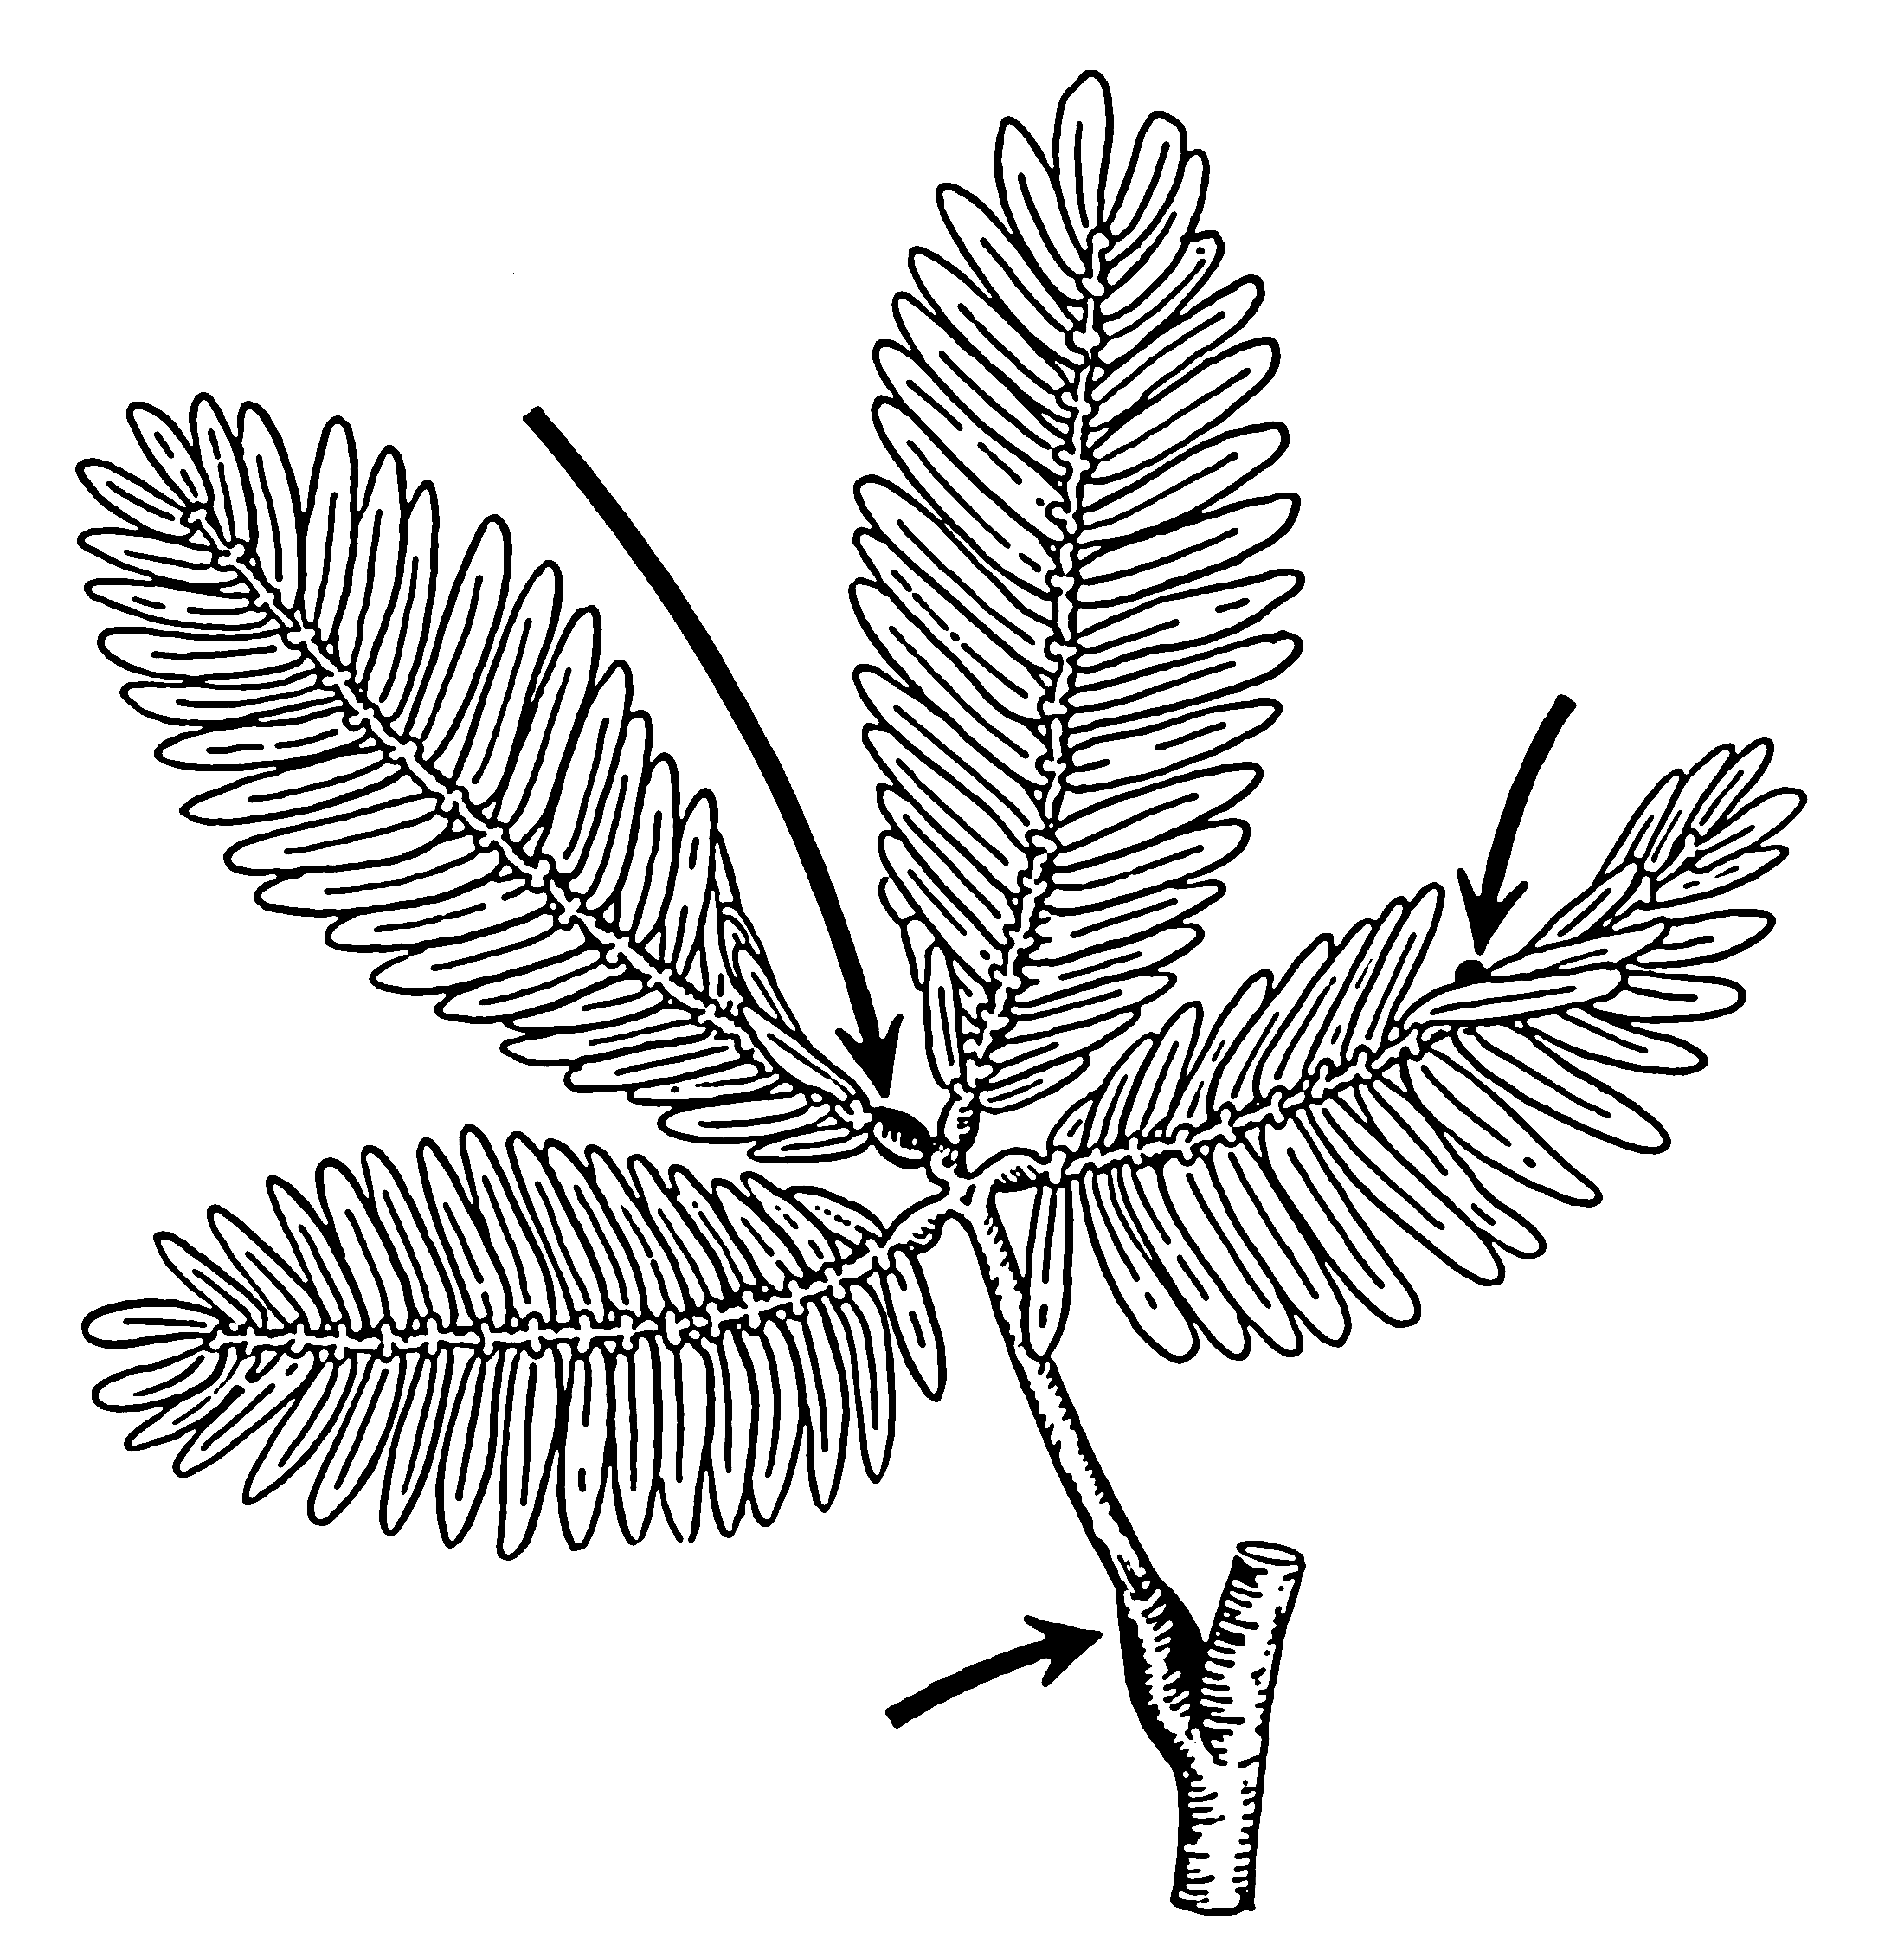 File:Base - botany (PSF).png - Wikimedia Commons